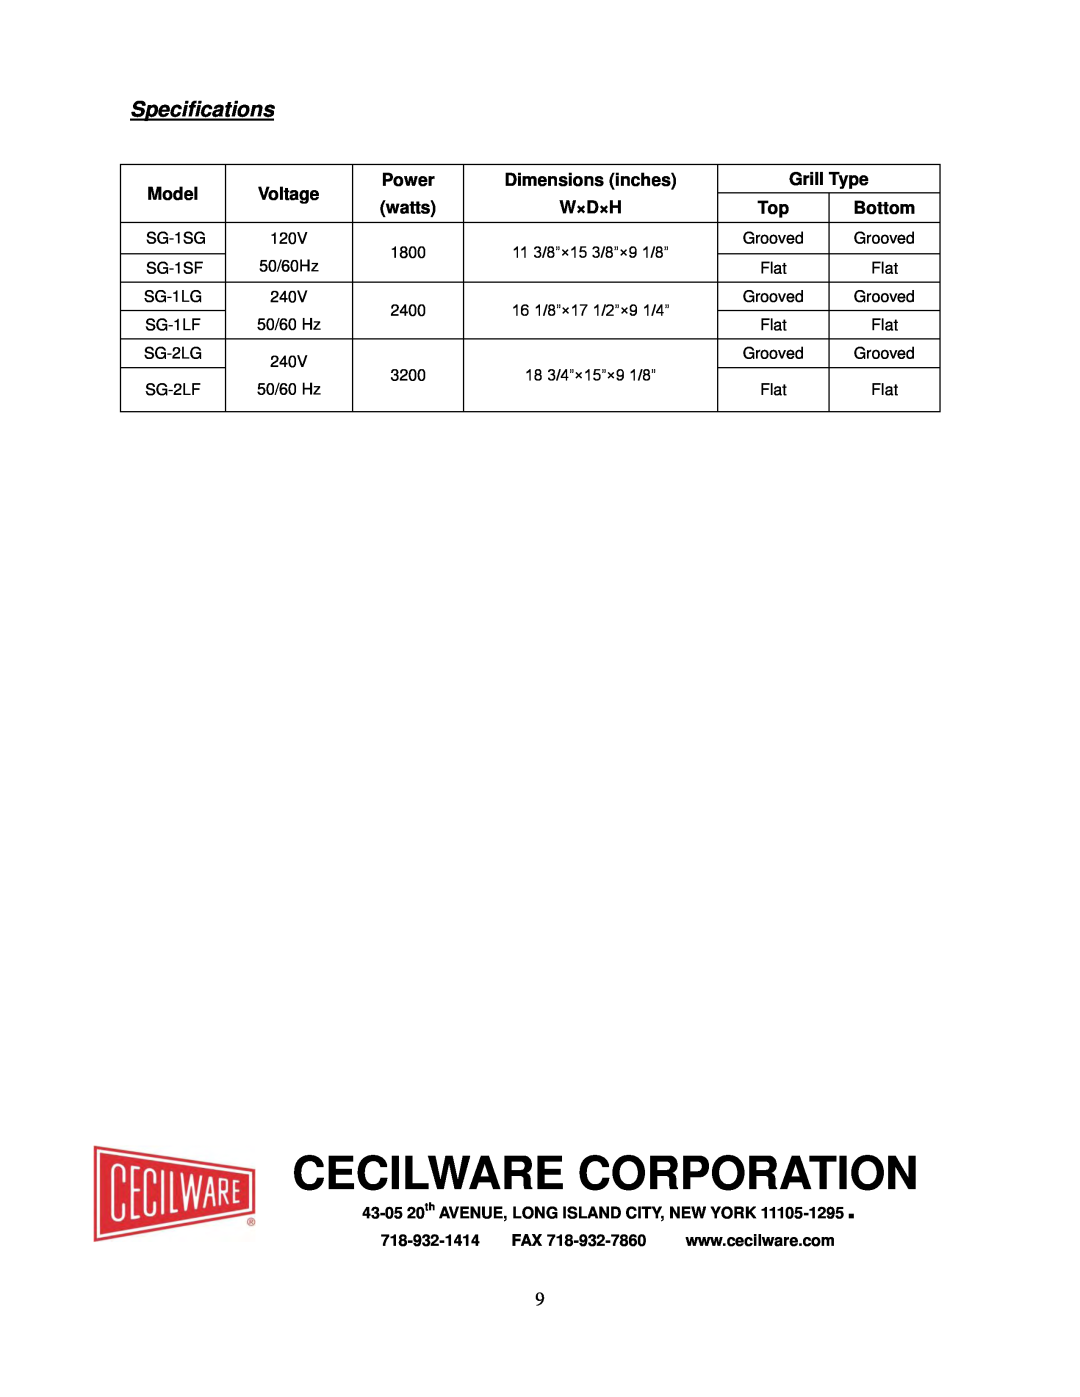 Cecilware SG2LG Cecilware Corporation, Specifications, Model, Voltage, Power, Dimensions inches, Grill Type, watts, W×D×H 